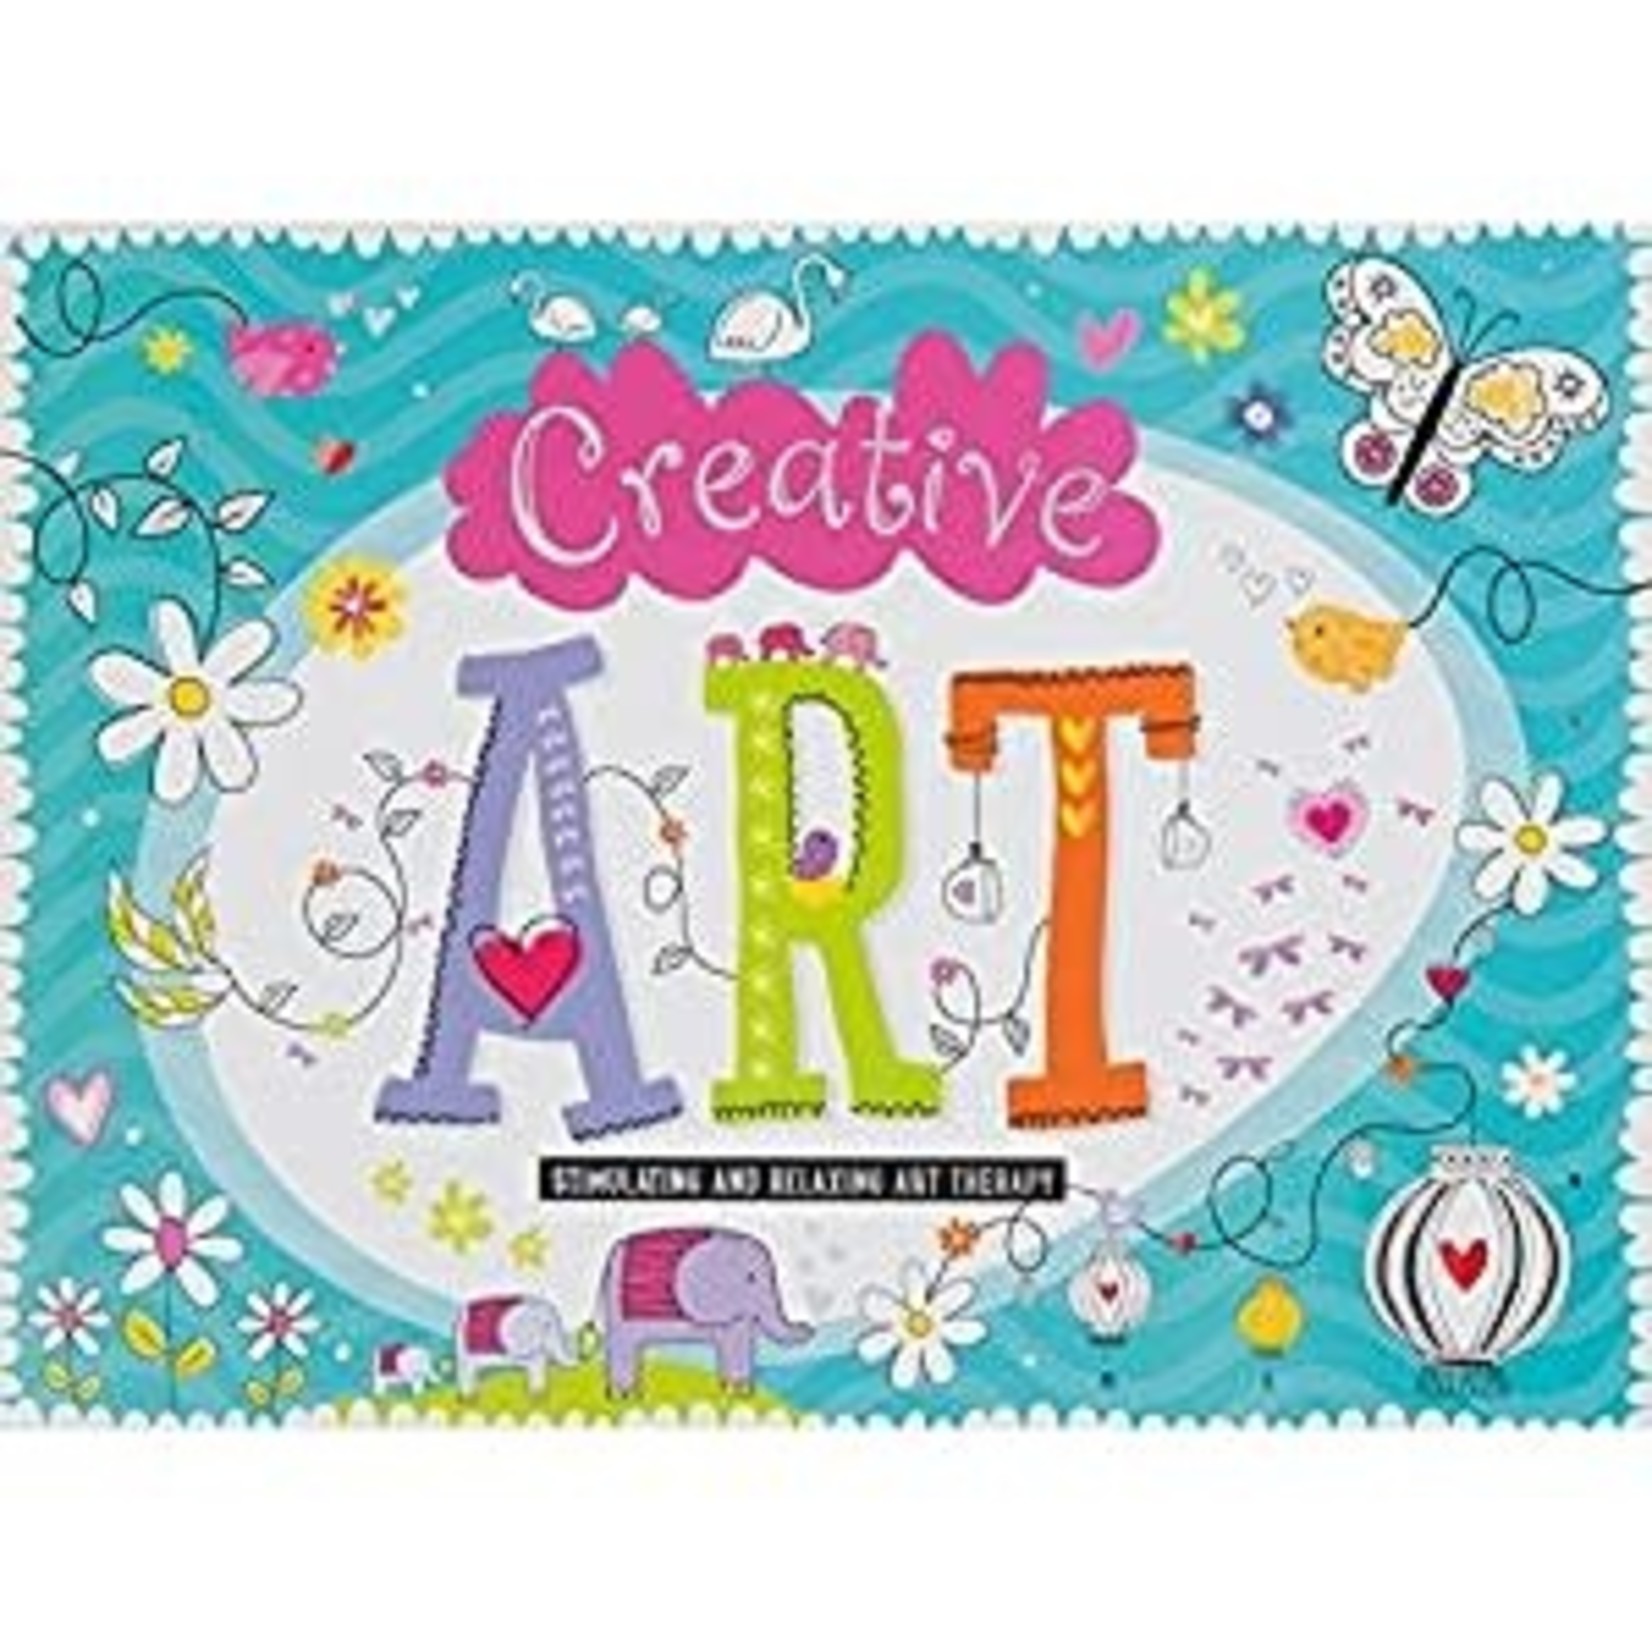 Make Believe Ideas Creative Art: Stimulating and Relaxing Art Therapy